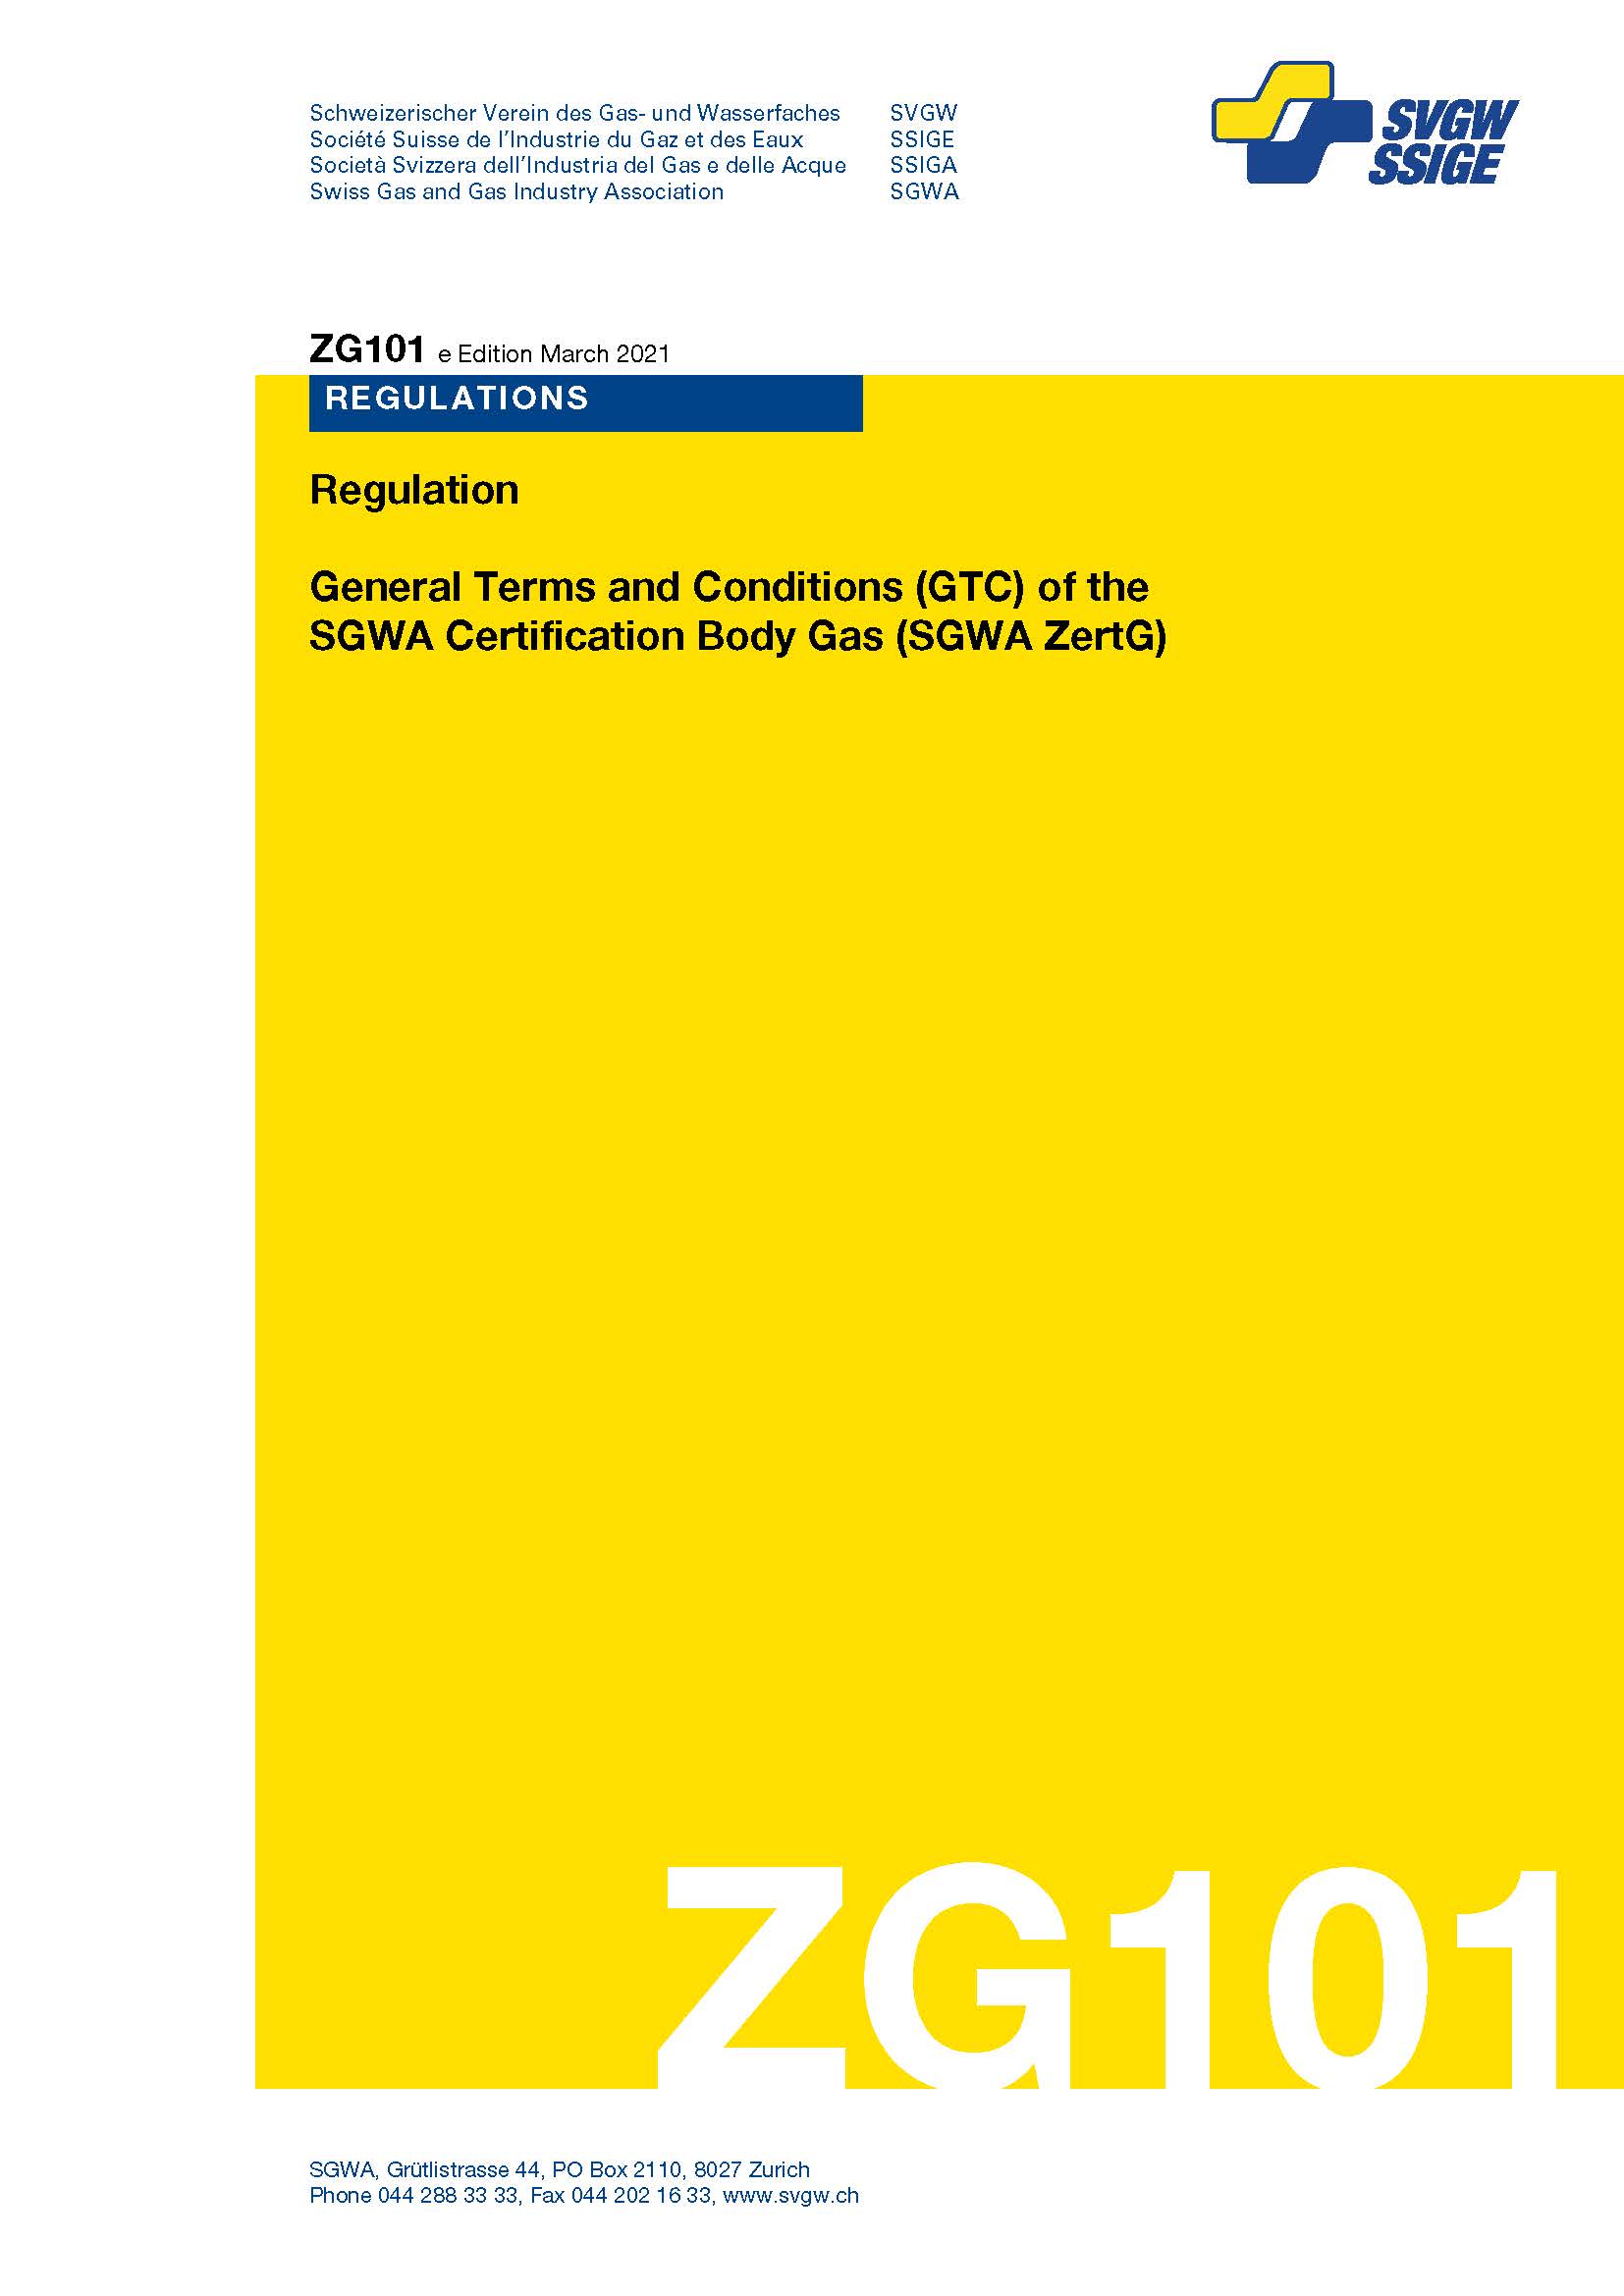 ZG101 e - Regulation; General Terms and Conditions (GTC) of the SGWA Certification Body Gas (SGWA ZertG)